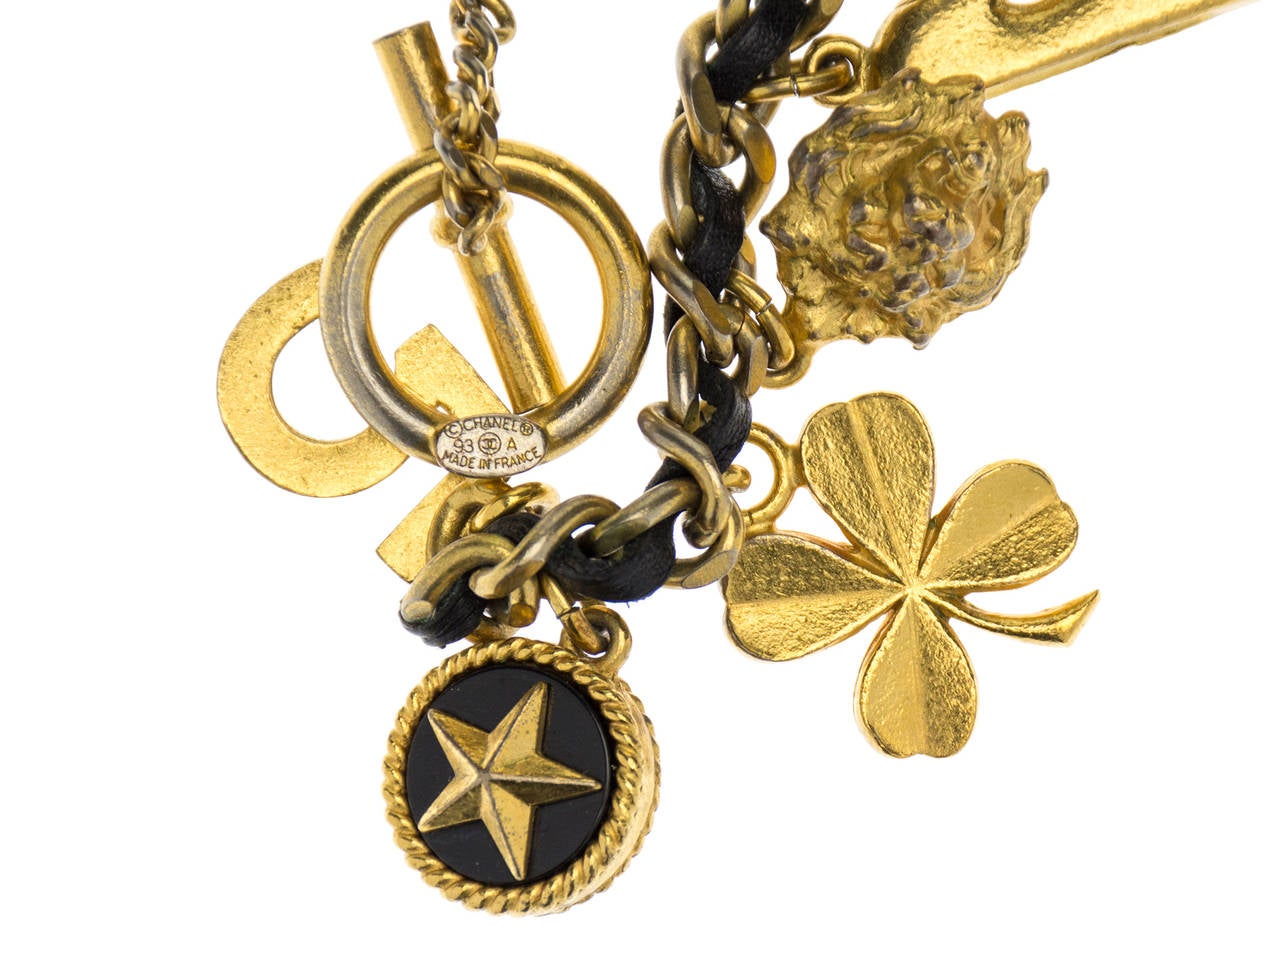 his is one of our favorite pieces from 1993 that incorporates signature chain and leather design by Chanel. Selection of charms include camellia flower with the pearl center, leo head, perfume bottle, clover leaf and number five to mention few. Bar